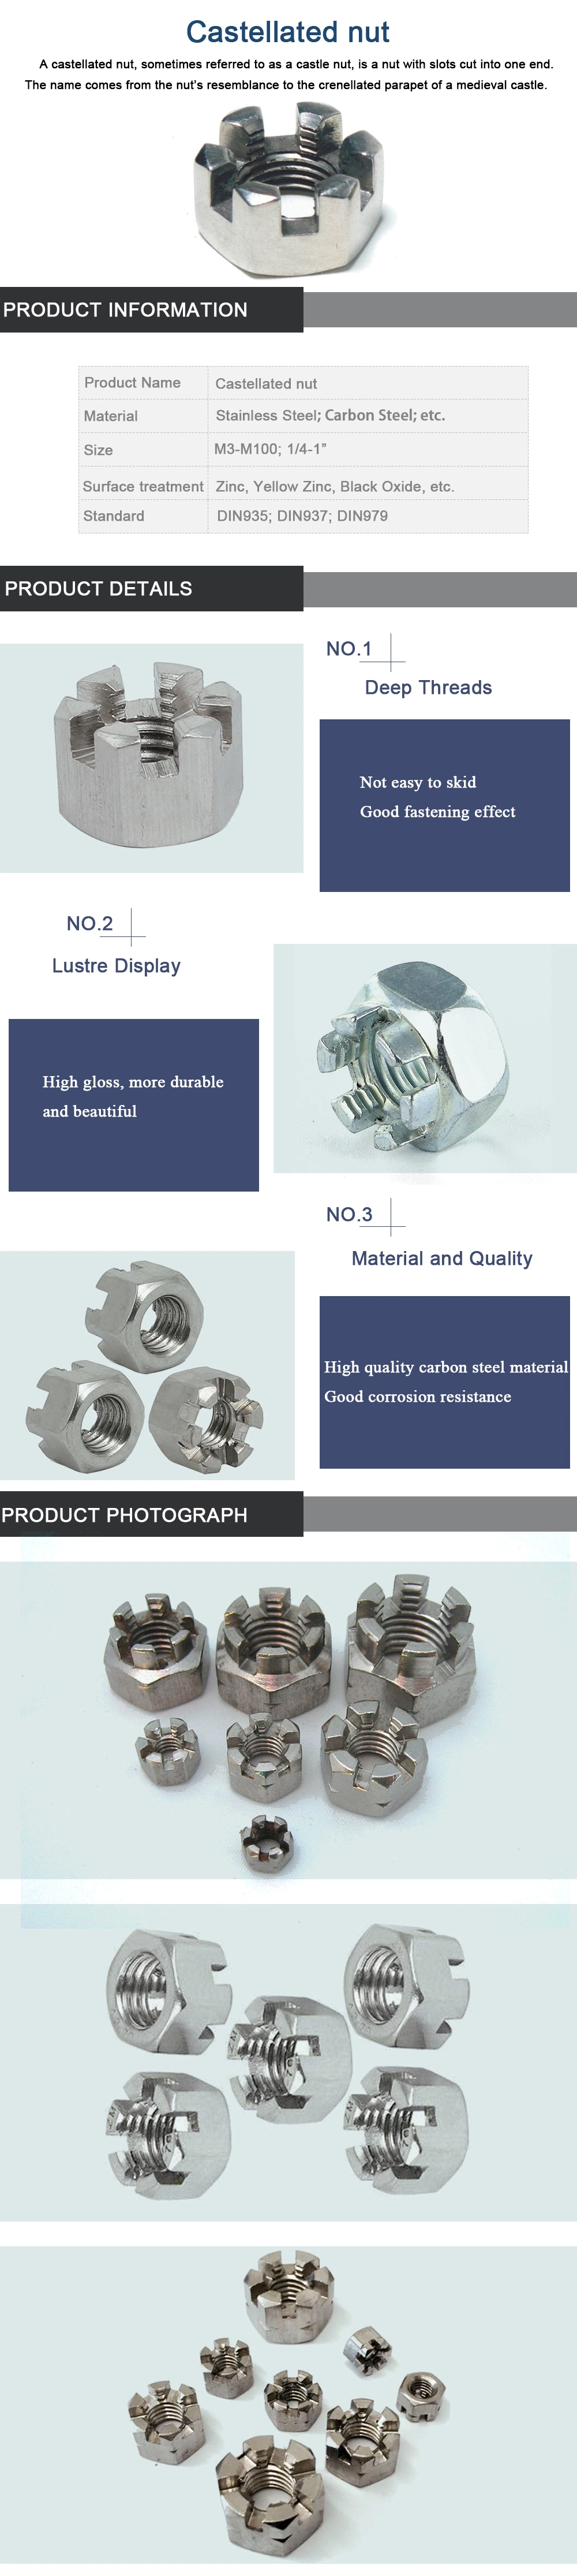 China Manufacturer DIN935 DIN979 DIN937 Custome-Made Hexagon Slotted and Castle Nuts Hex Nut